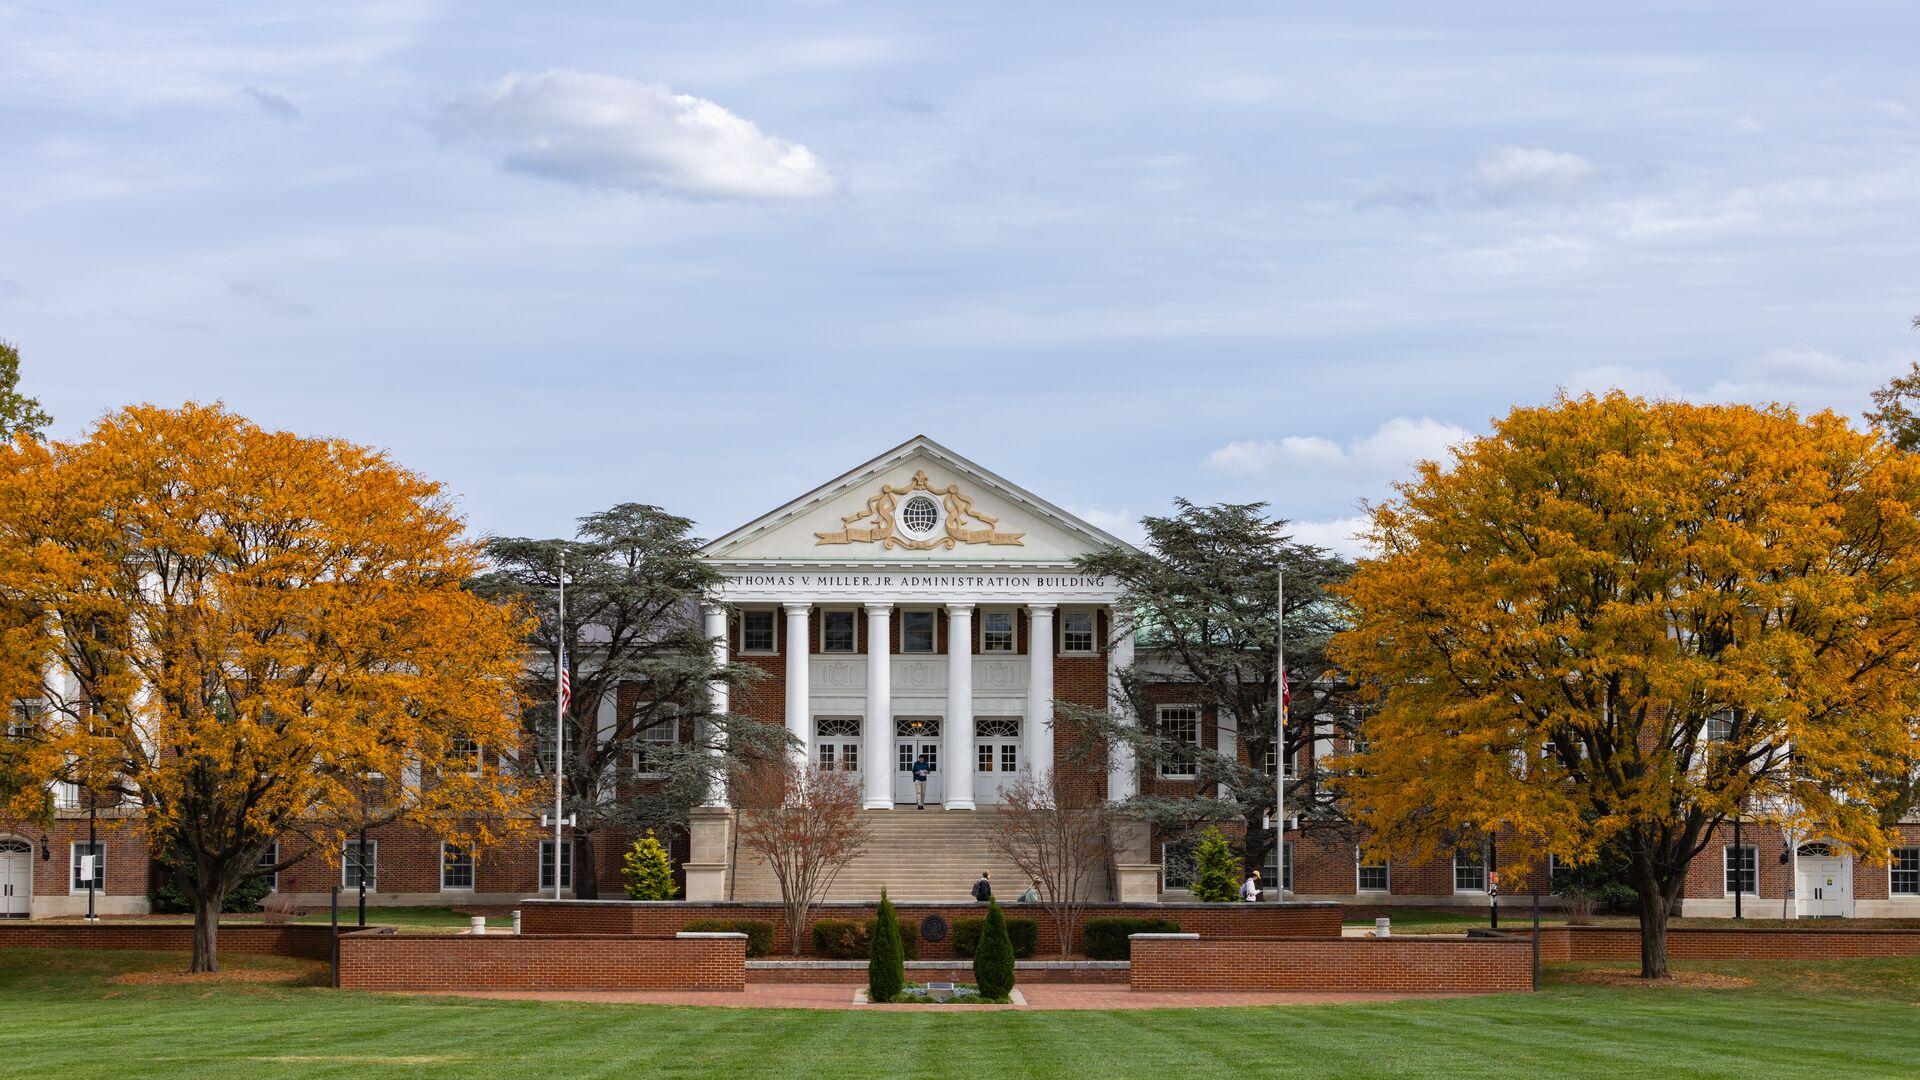 View of Miller Administration Building with fall foliage.